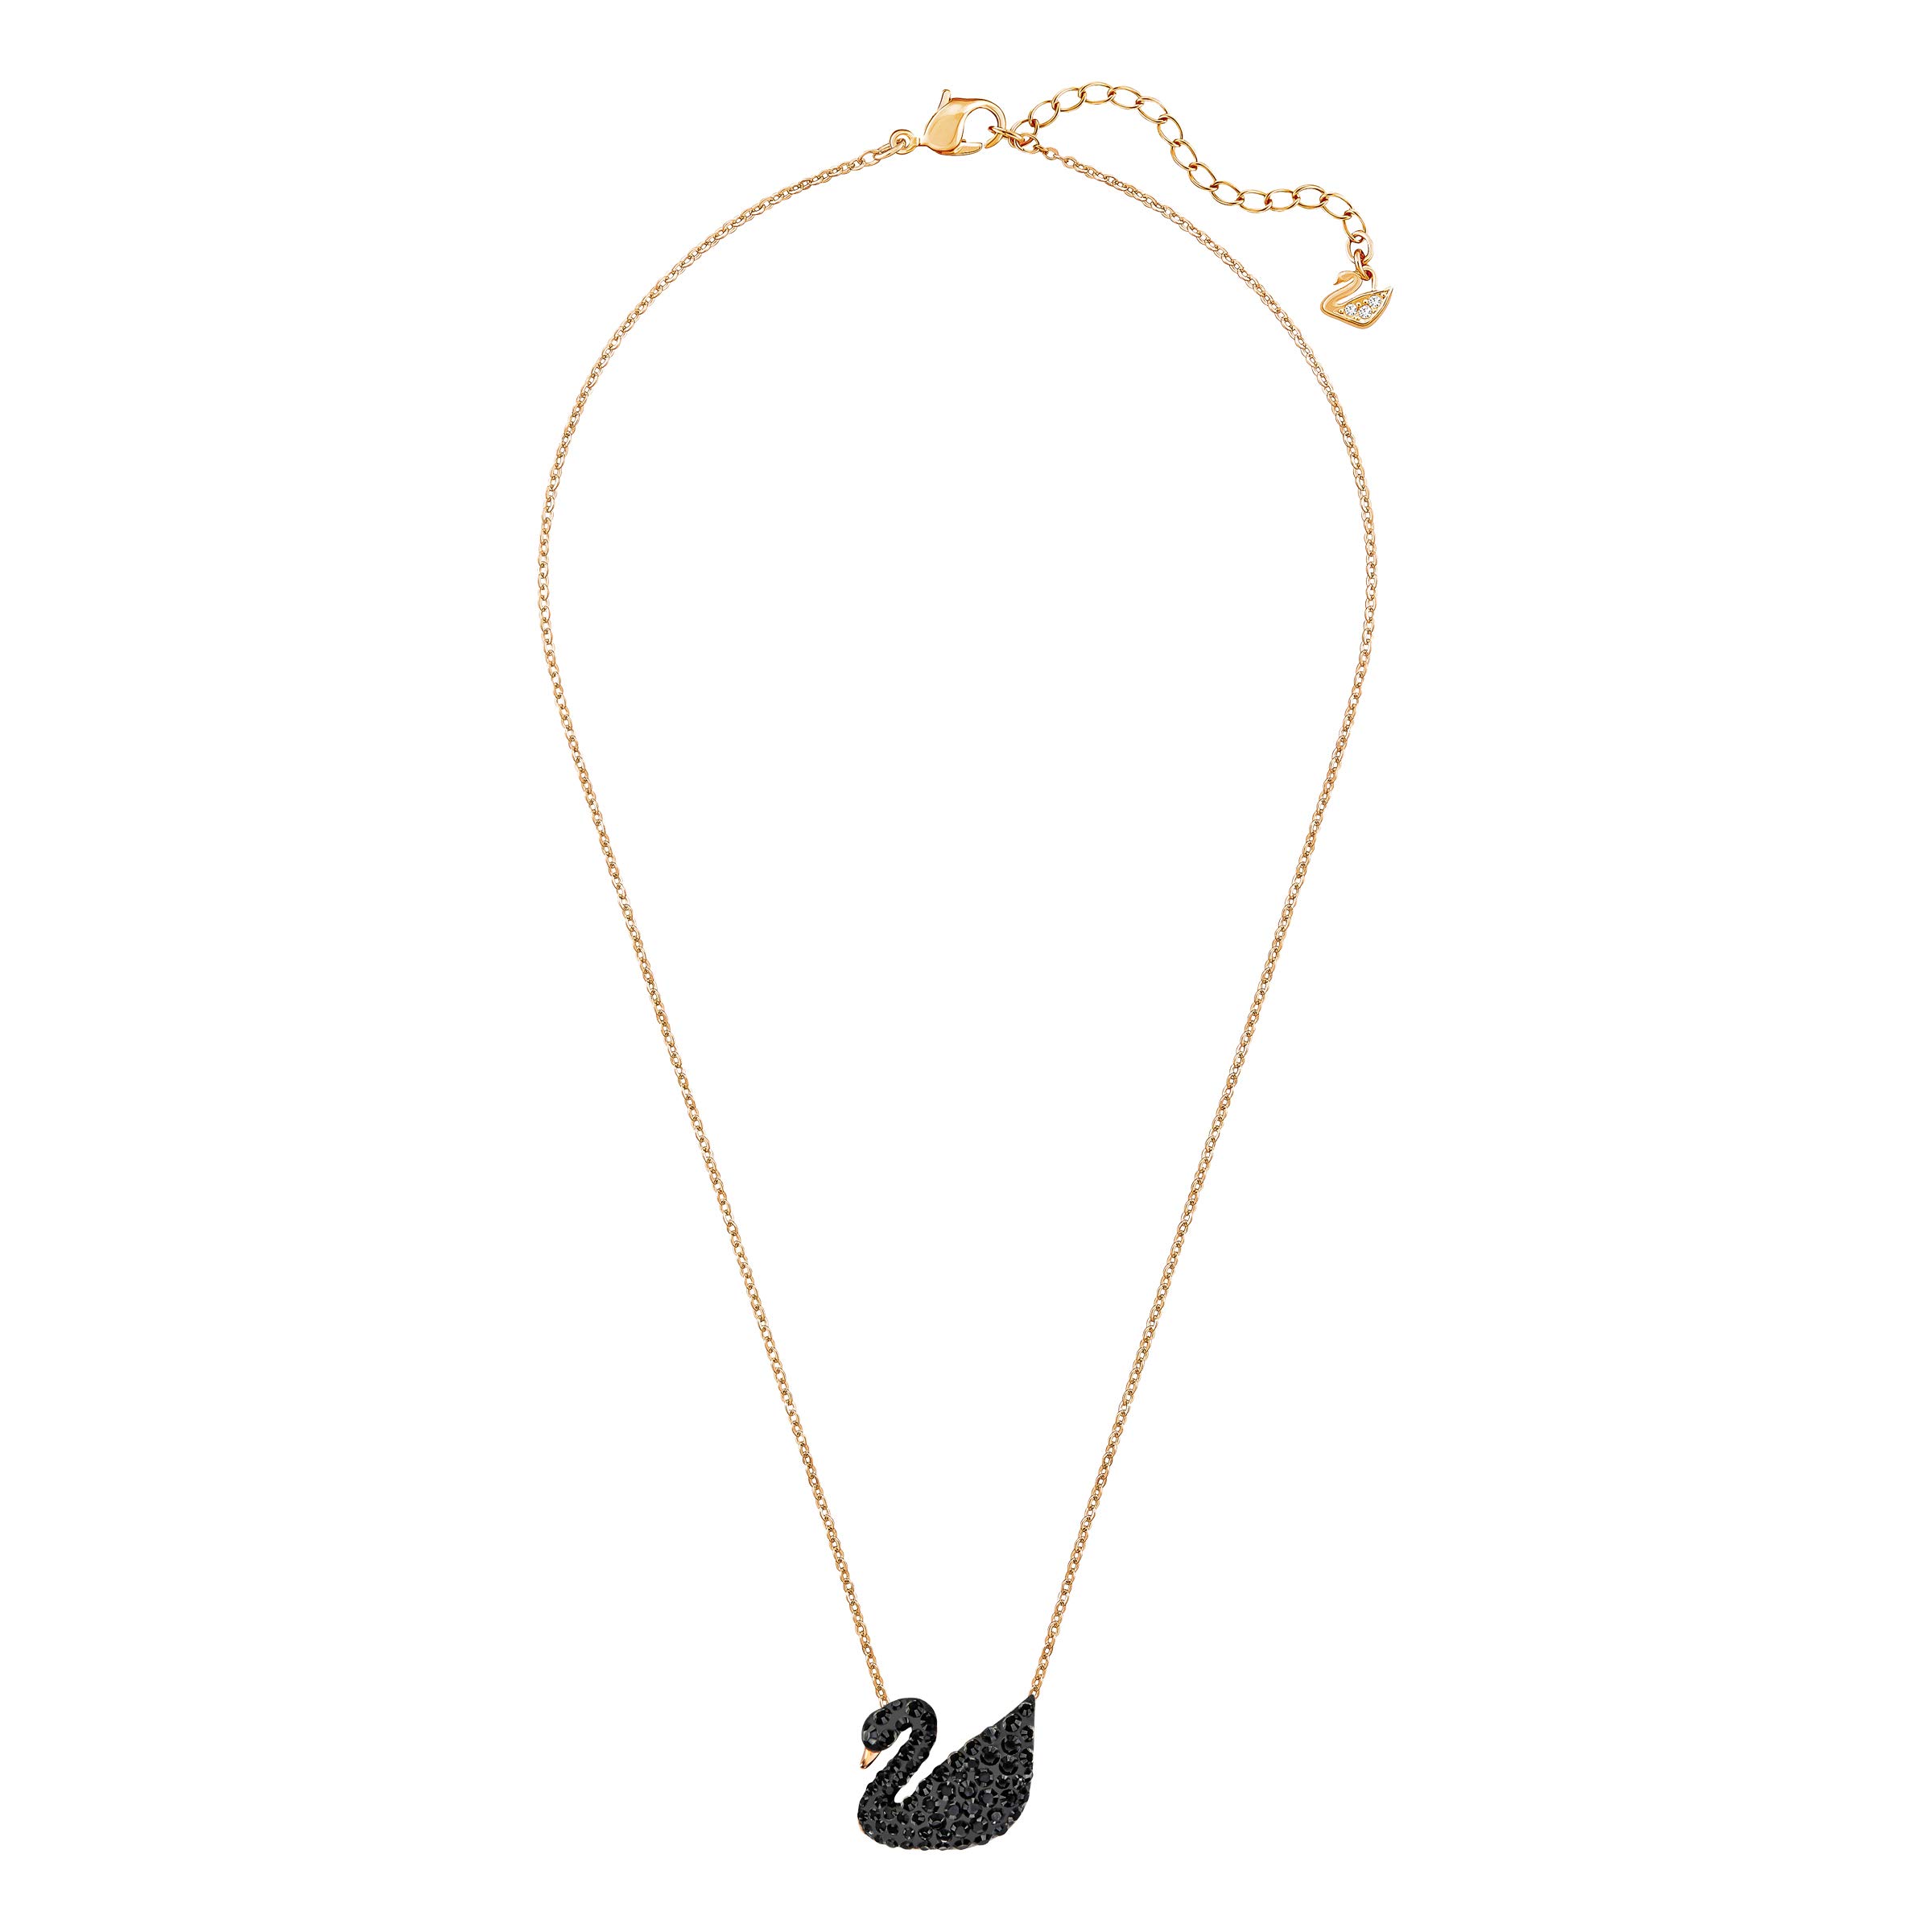 SWAROVSKI Iconic Swan Necklace and Earrings Collection, Rose Gold Tone Finish, Black Crystals